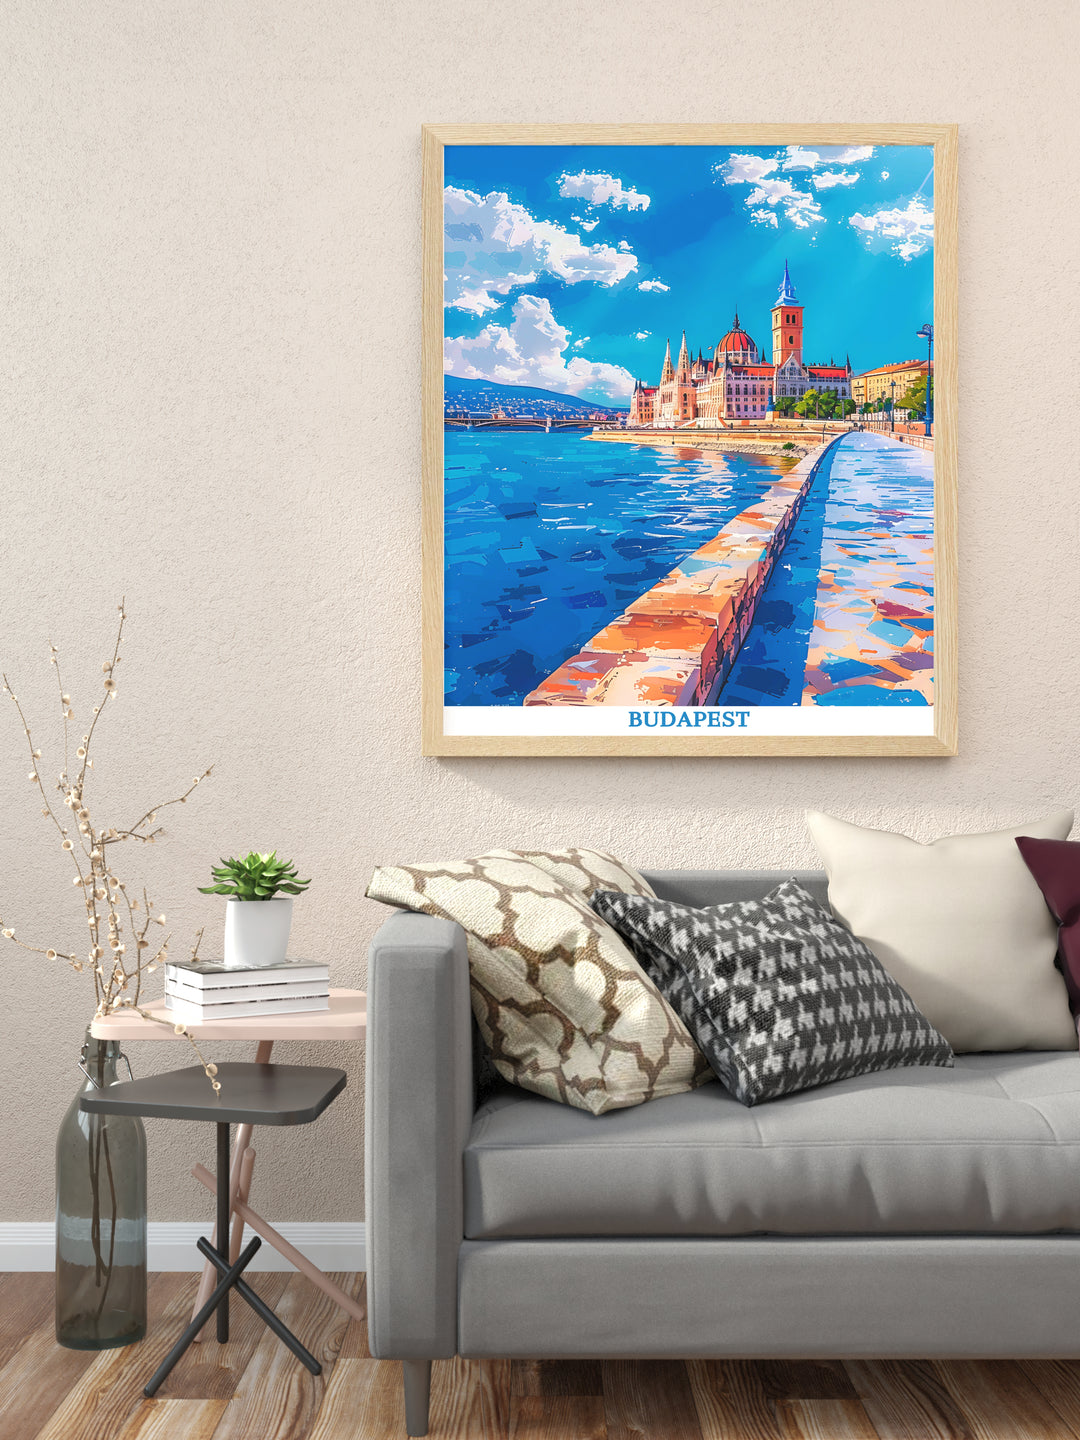 Explore Hungary with Budapest Travel Print - Perfect Gifts for Art Lovers